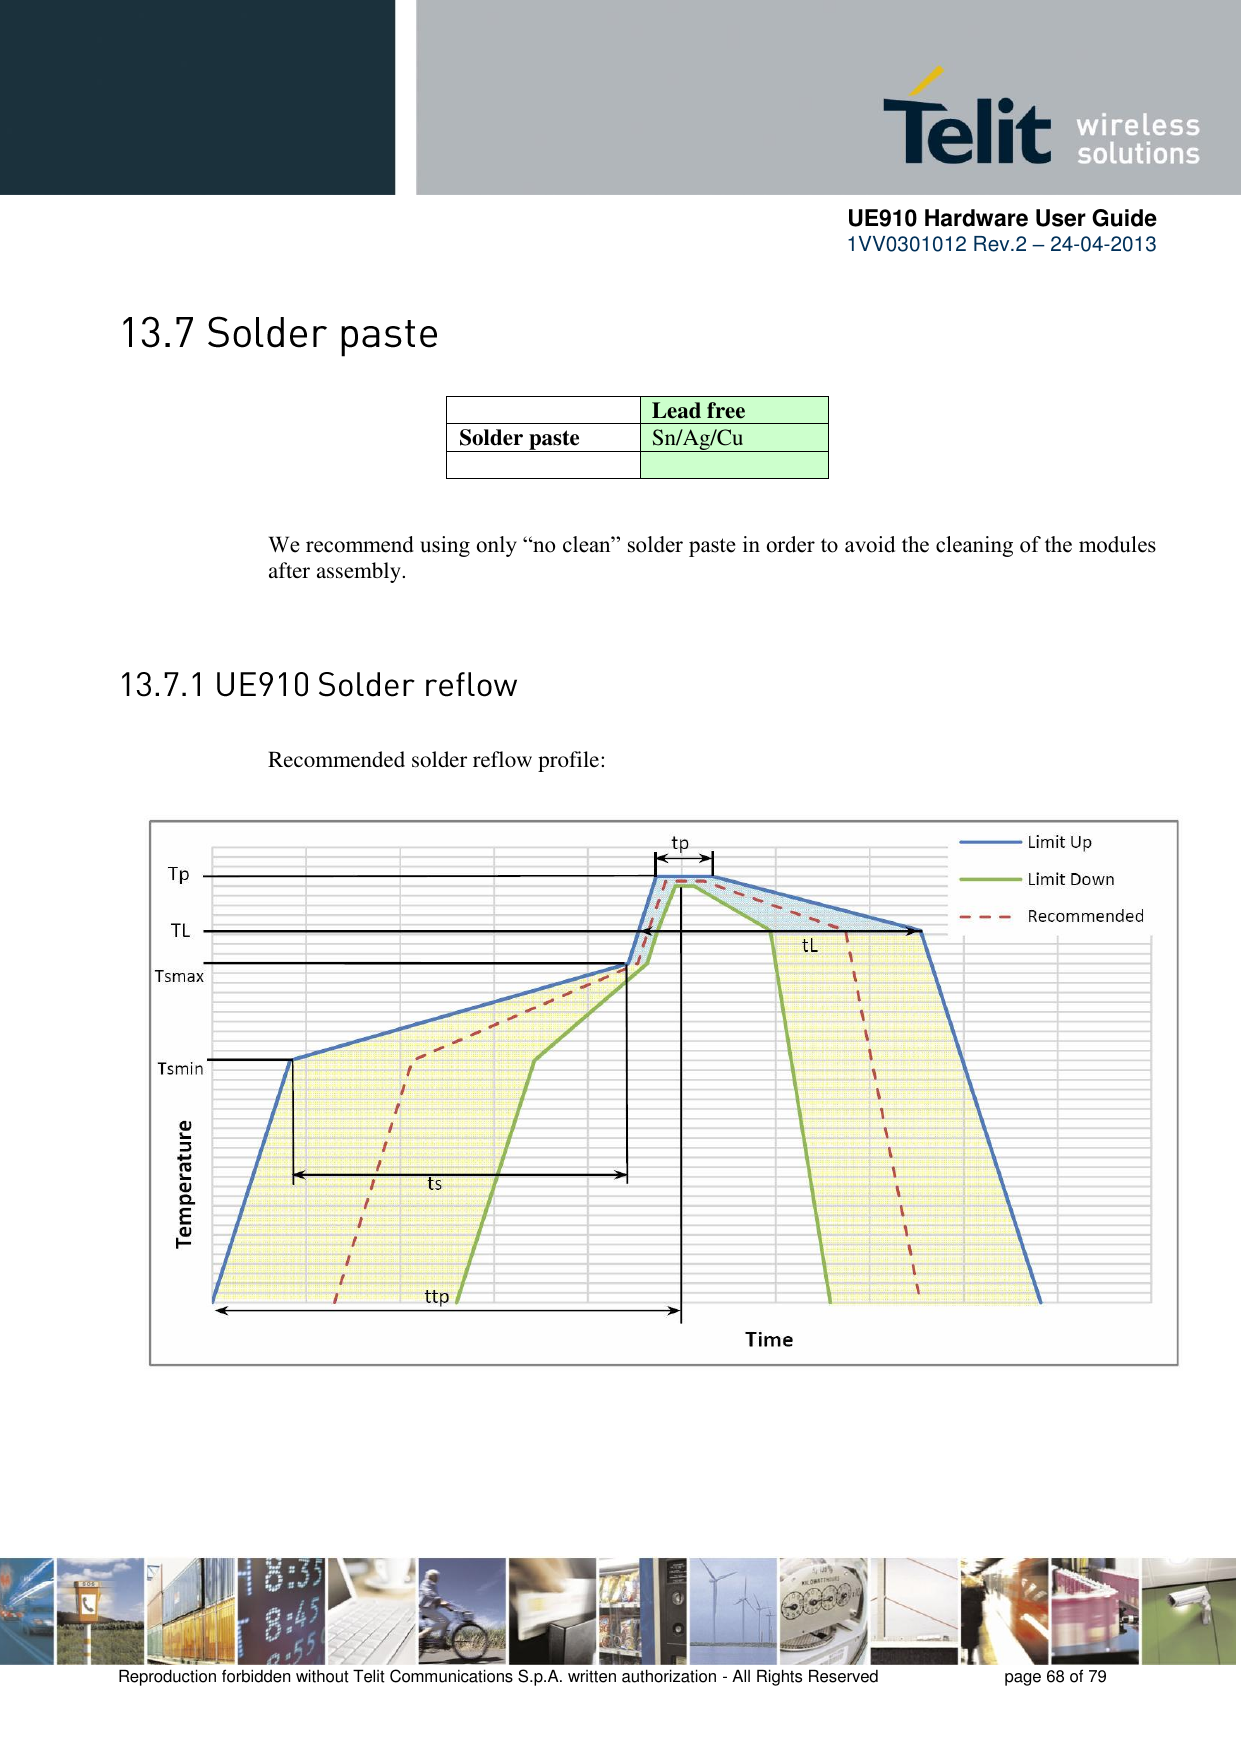      UE910 Hardware User Guide  1VV0301012 Rev.2 – 24-04-2013    Reproduction forbidden without Telit Communications S.p.A. written authorization - All Rights Reserved    page 68 of 79     Lead free Solder paste Sn/Ag/Cu     We recommend using only “no clean” solder paste in order to avoid the cleaning of the modules after assembly.     Recommended solder reflow profile:   